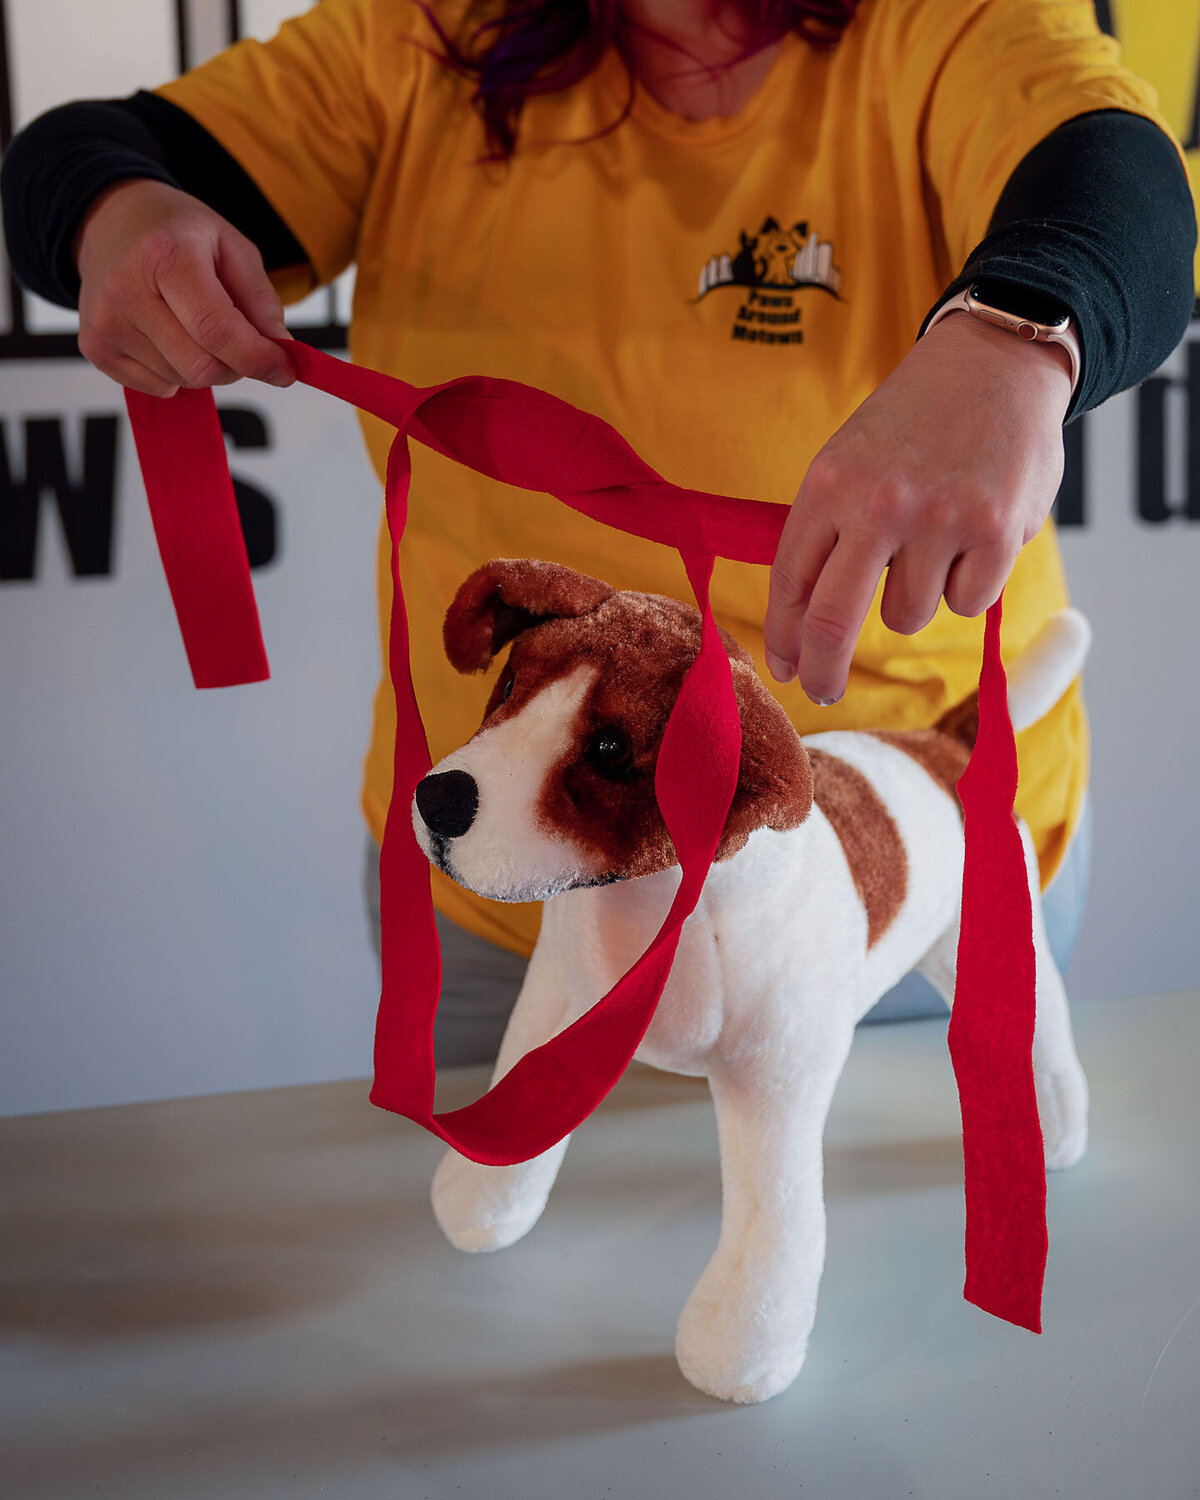 Business owner demonstrating using a cotton belt as a muzzle on a stuffed dog for training